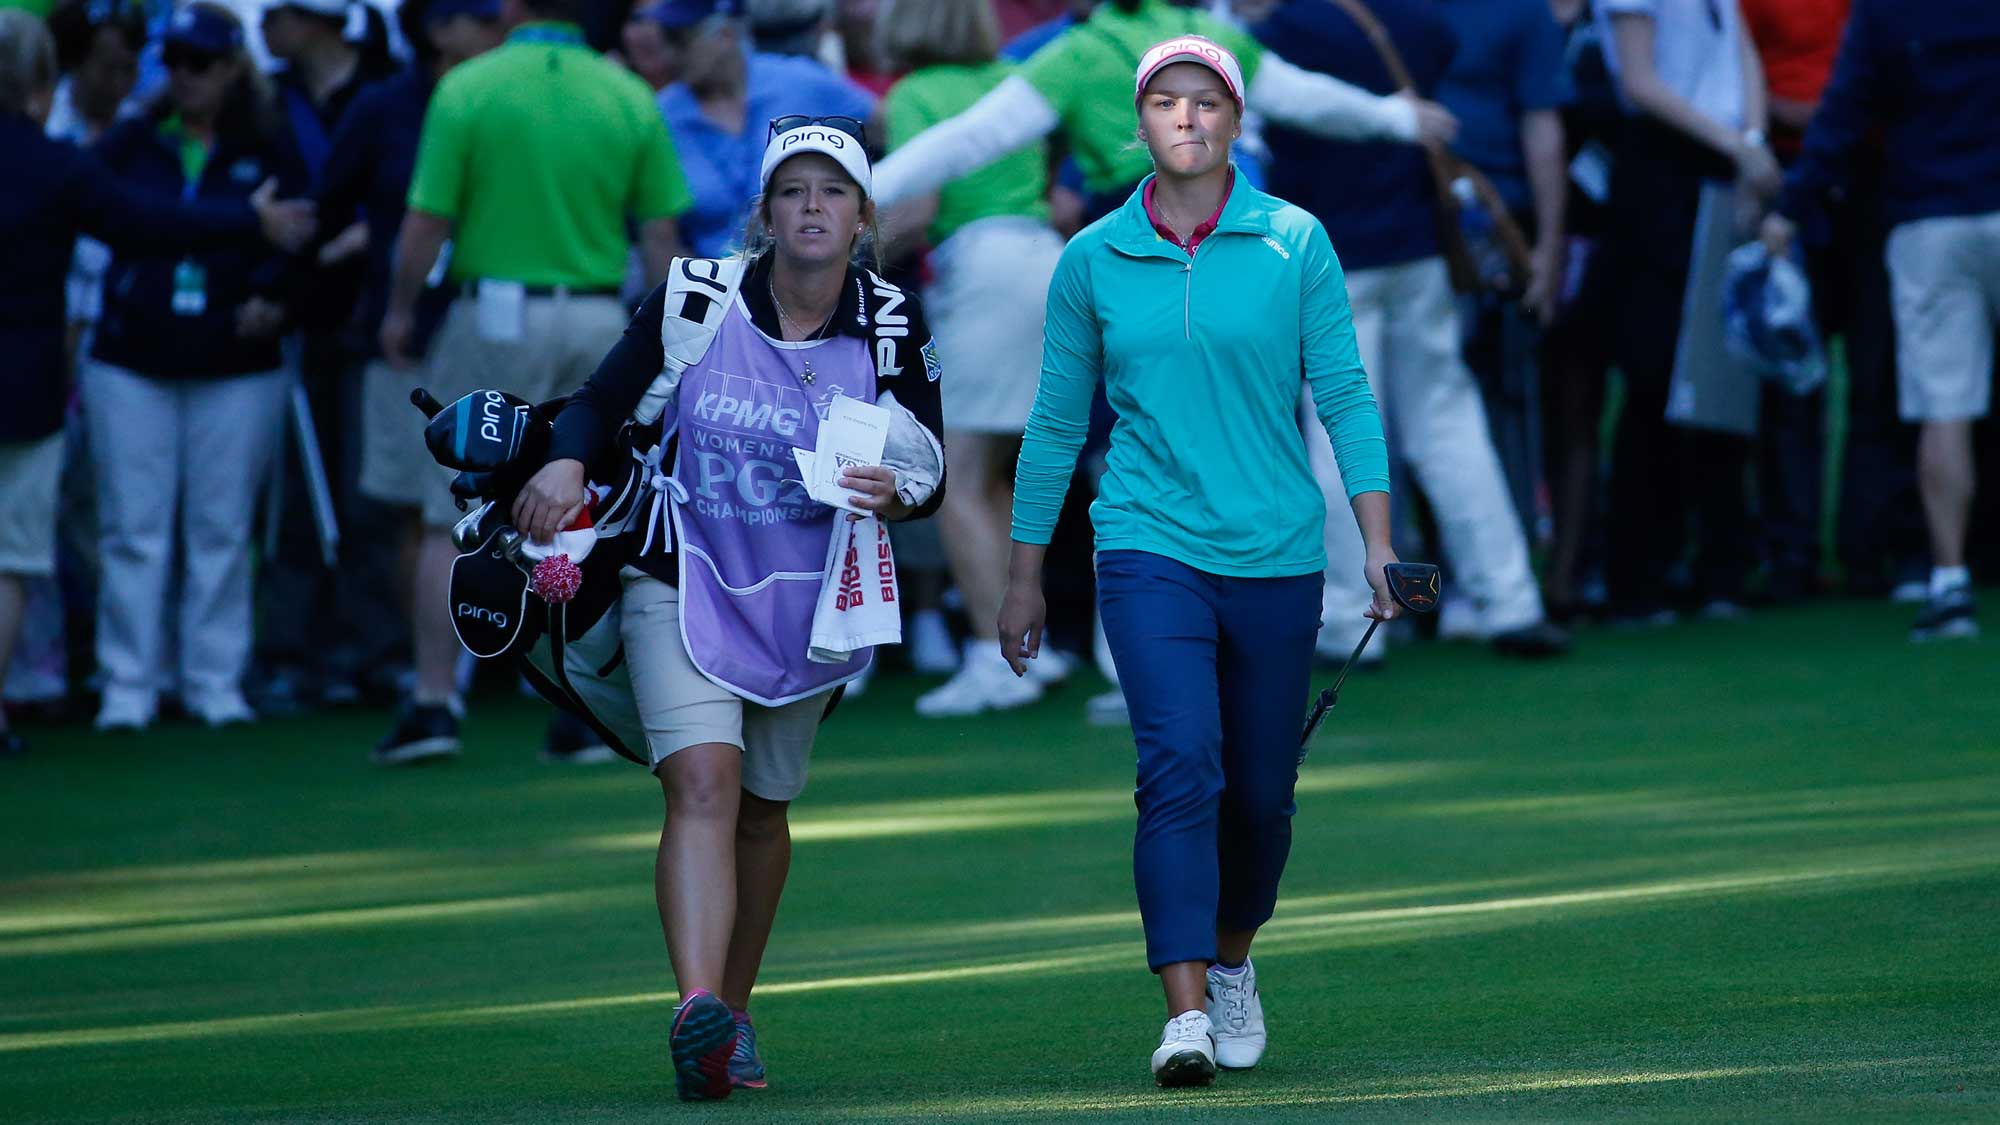 Brooke Henderson (R) of Canada and her caddie sister Brittany, walk up to the 18th green during a shoot-out in the final round of the KPMG Women's PGA Championship